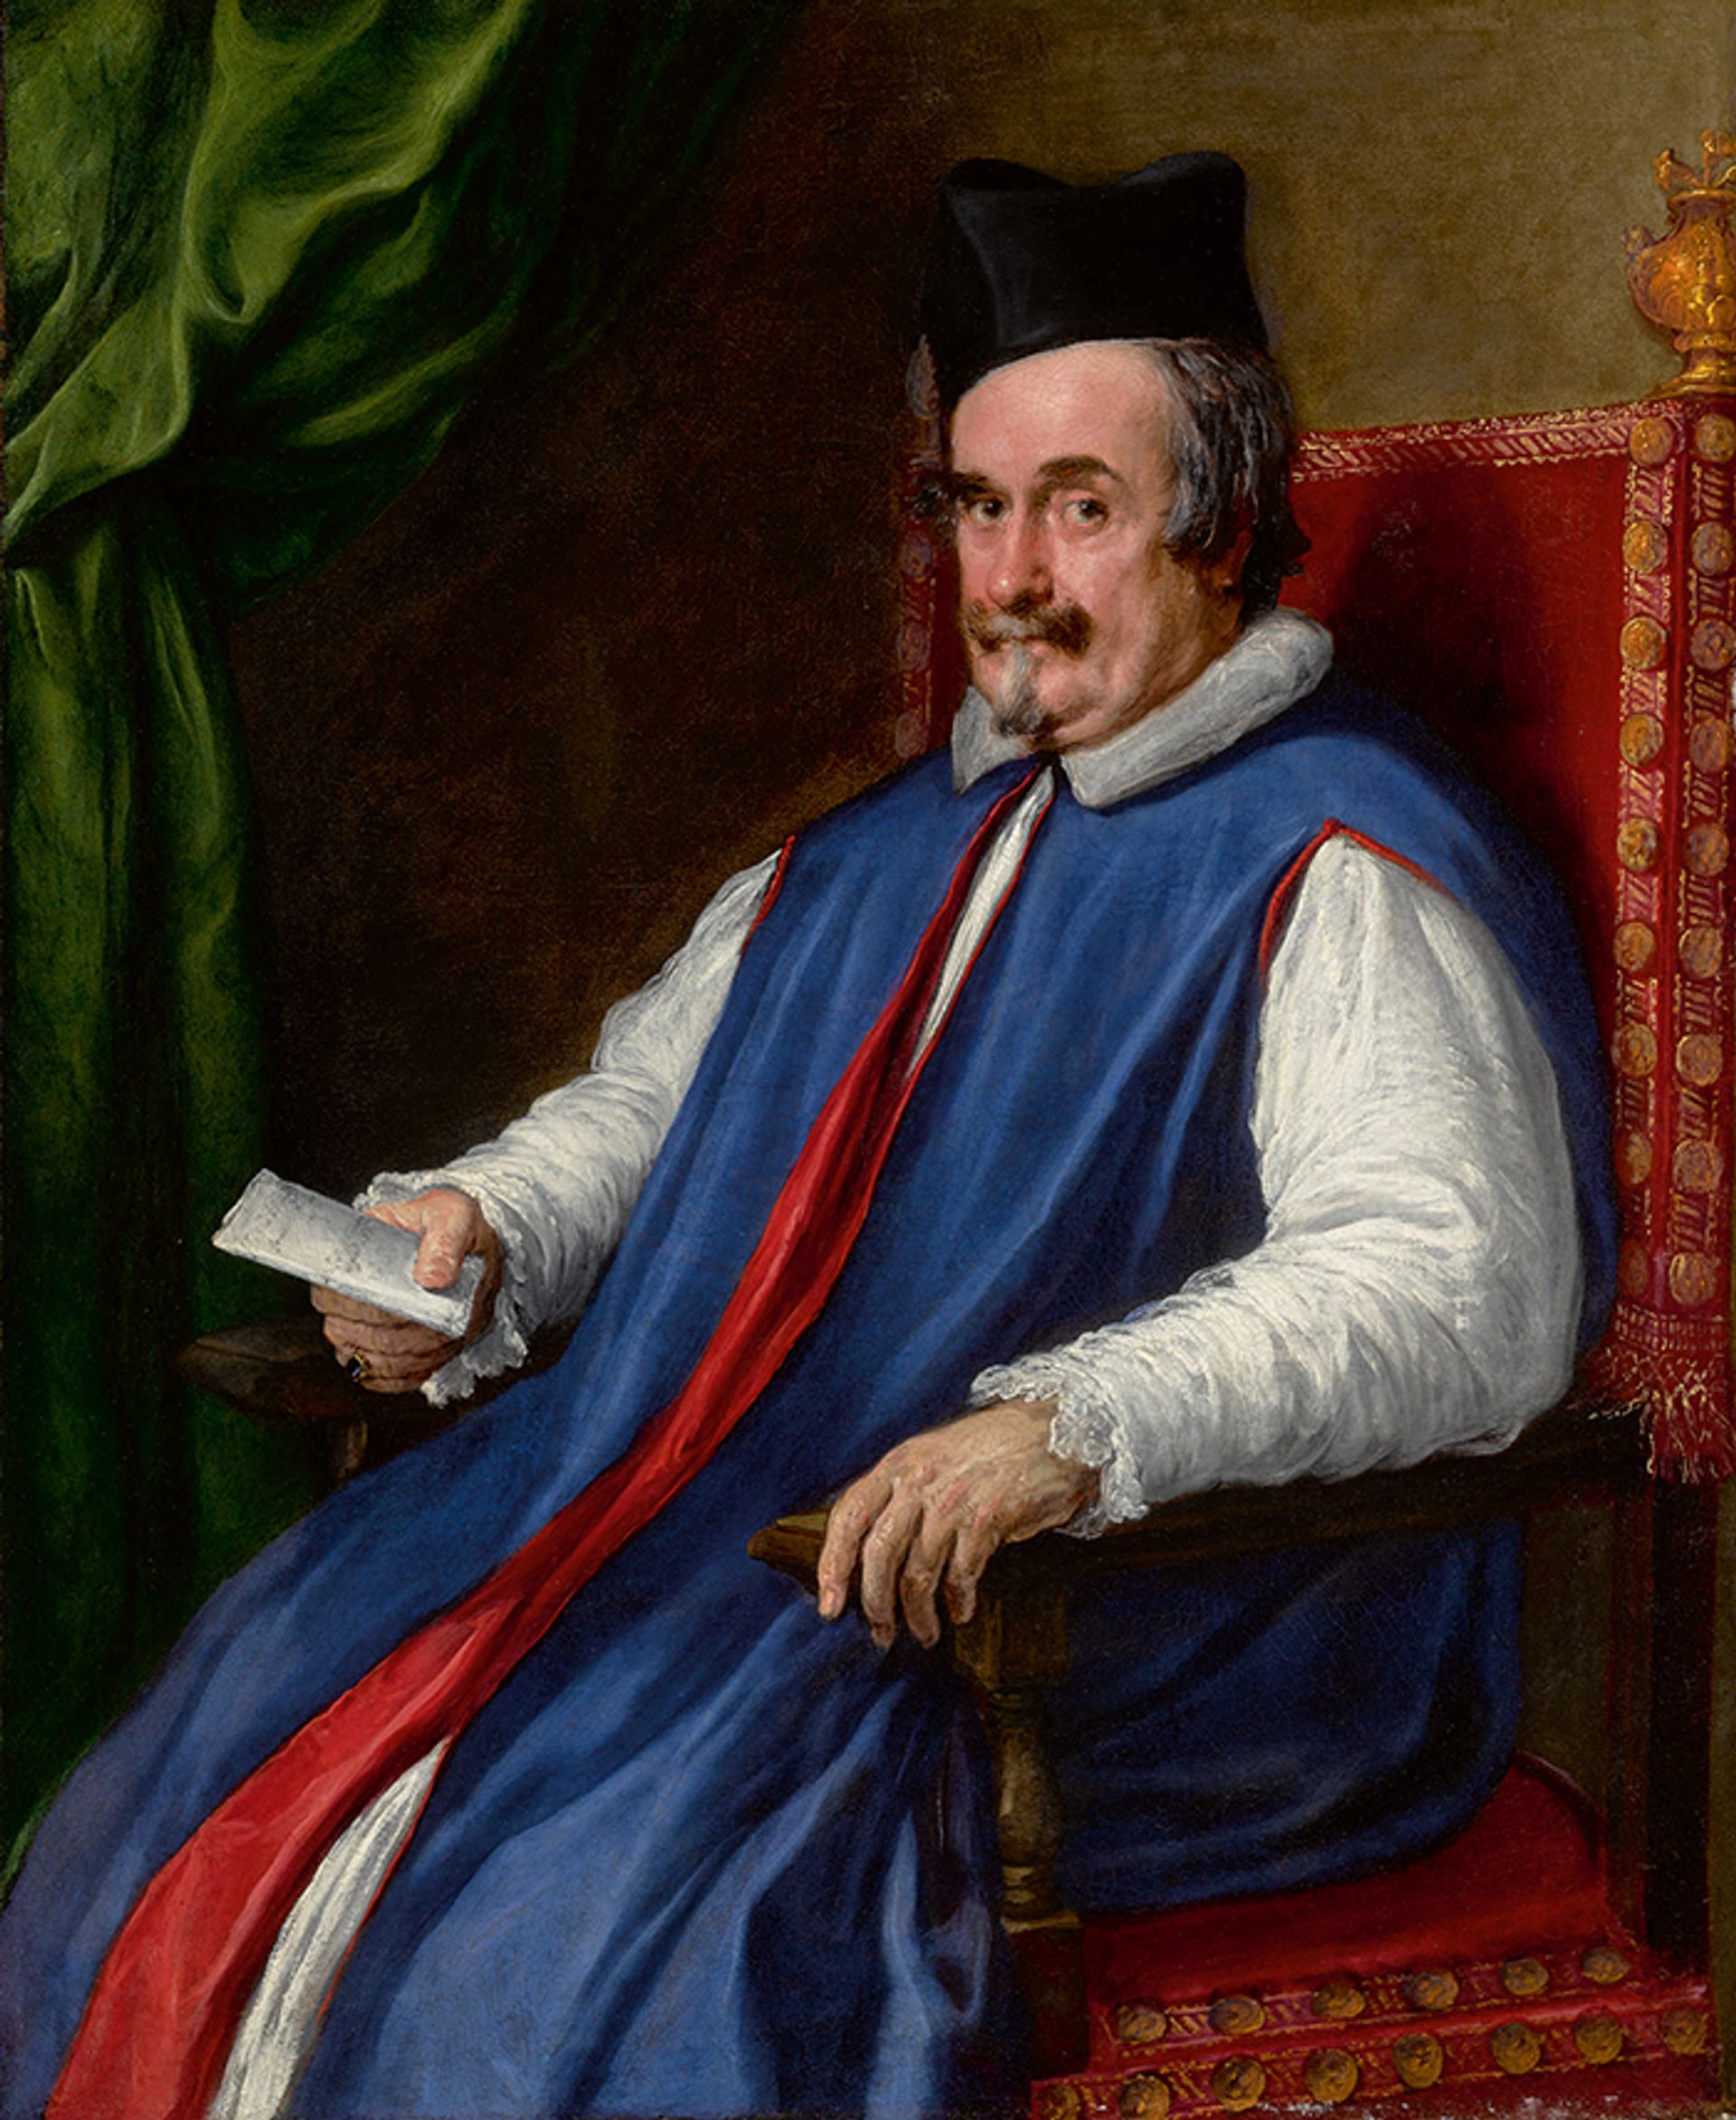 Diego Velázquez's Portrait Of Monsignor Cristoforo Segni (d. 1661), Maggiordomo To Pope Innocent X, achieved $4.06m at Sotheby's Courtesy of Sotheby's